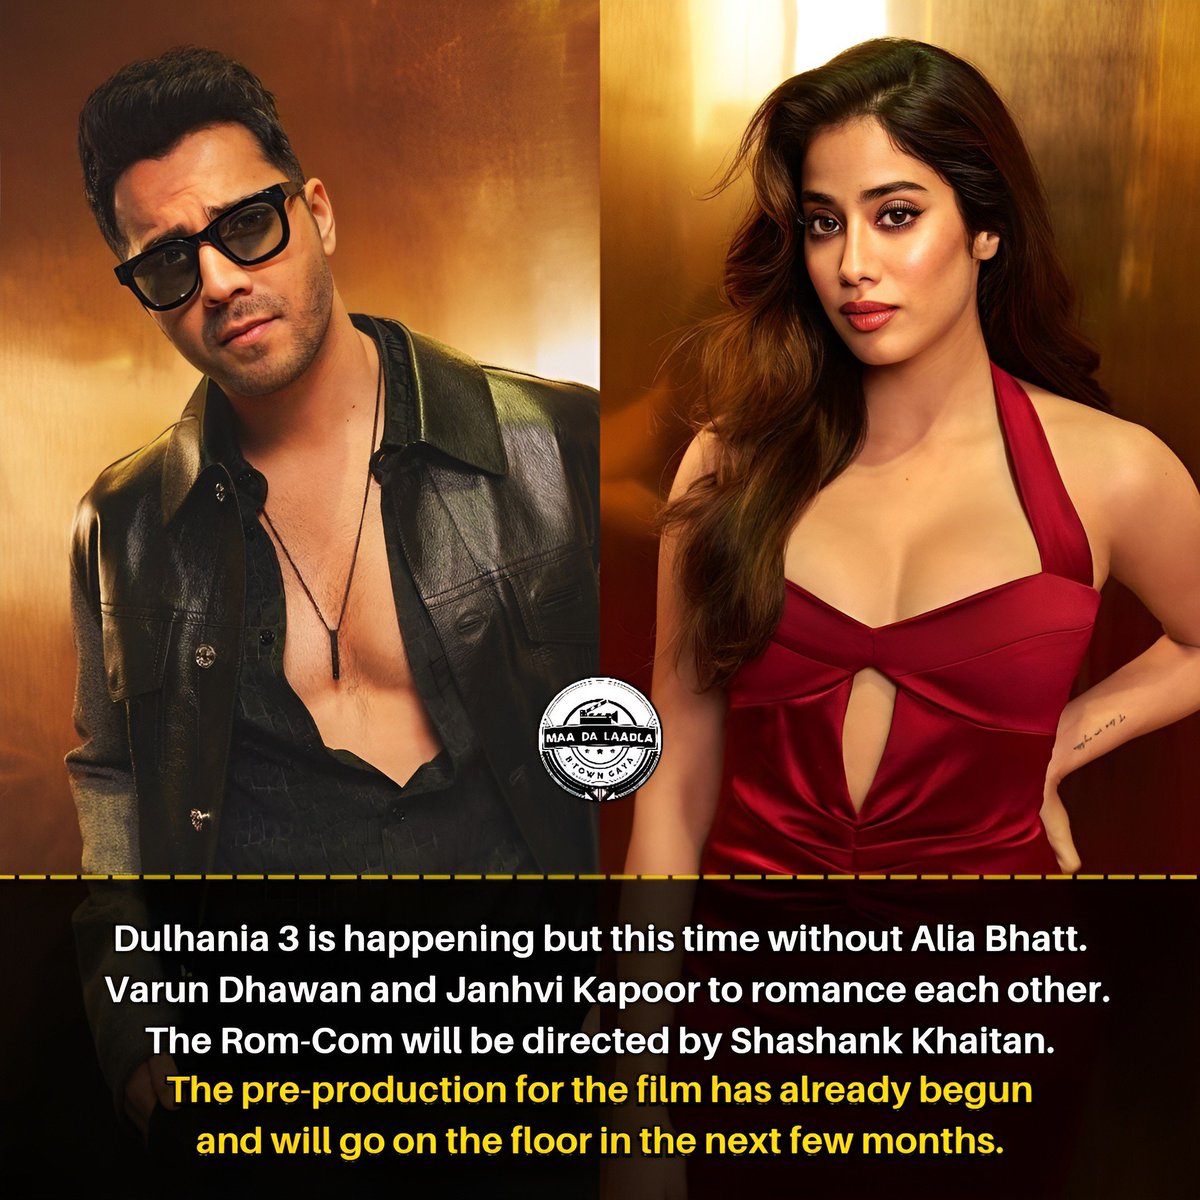 #Dulhania3 is happening but sadly this time without #AliaBhatt! 🥹

This time with the #Bawaal jodi #VarunDhawan and #JanhviKapoor 💝

#HumptySharmaKiDulhania #BadrinathKiDulhania